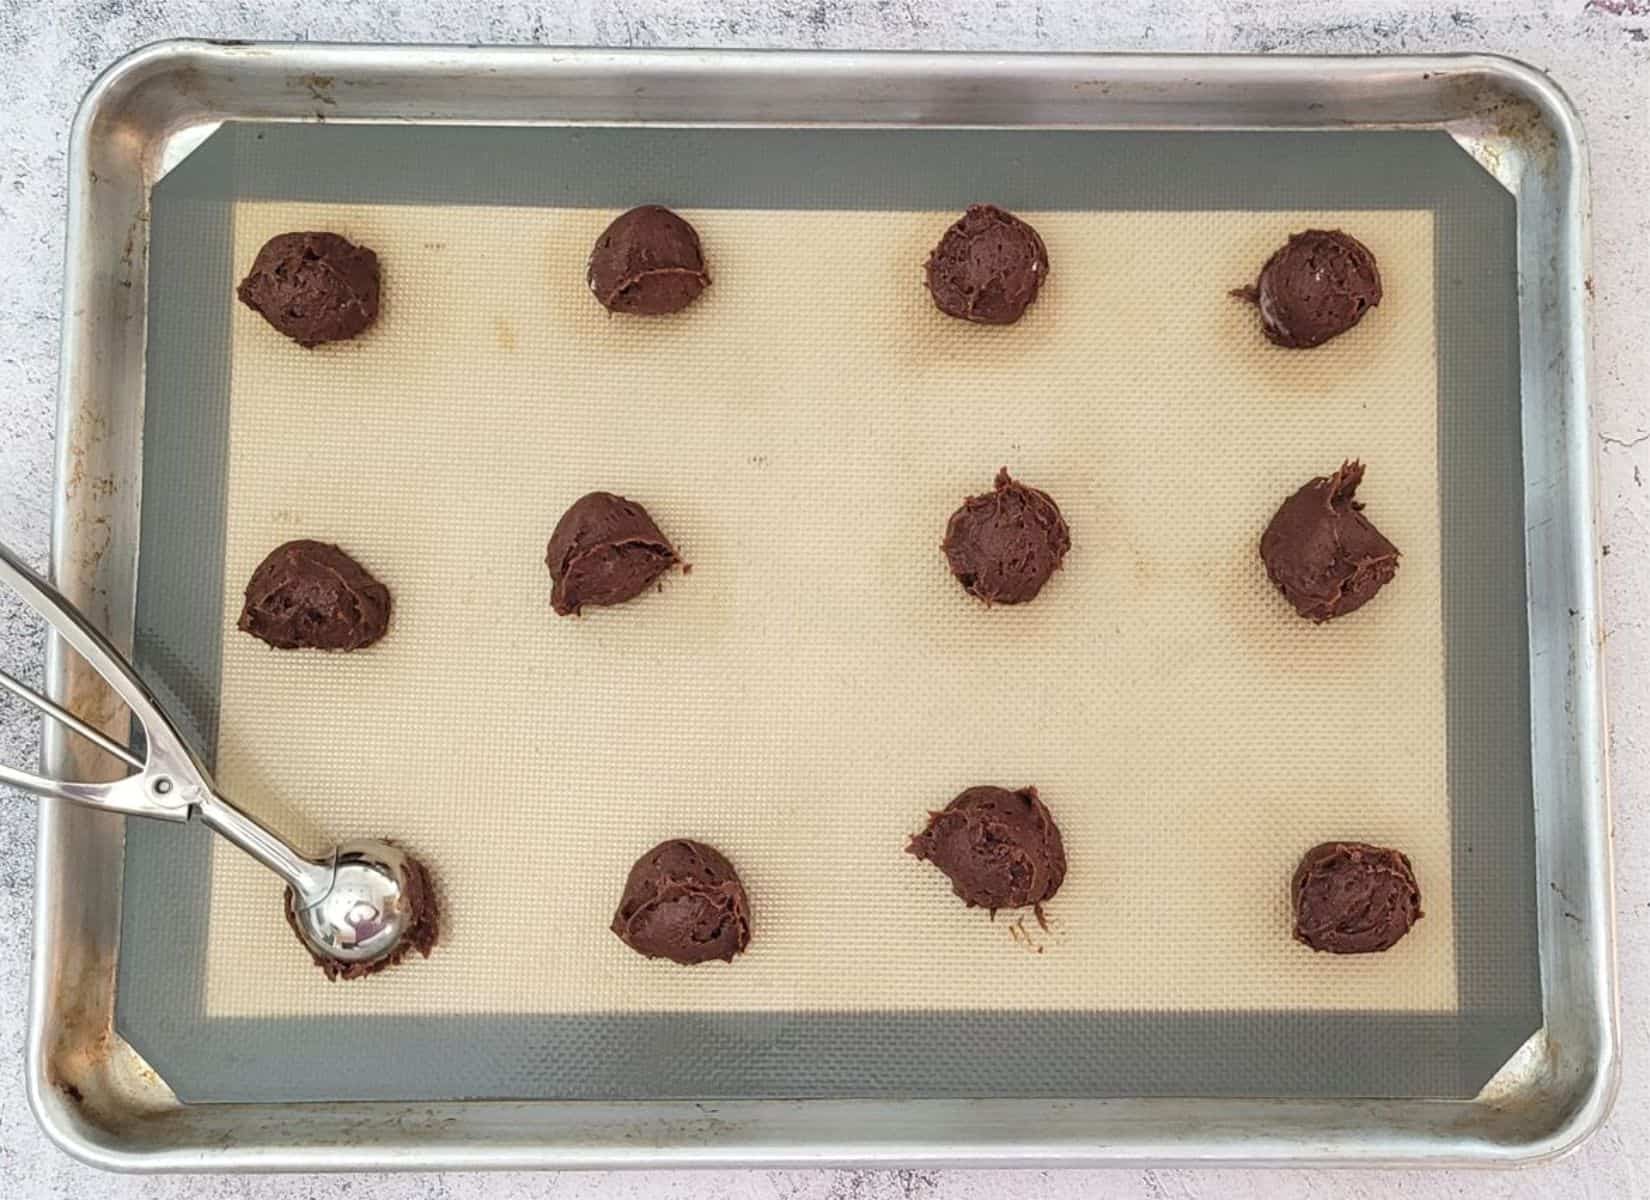 balls of cookie dough scooped onto a sheet pan for baking